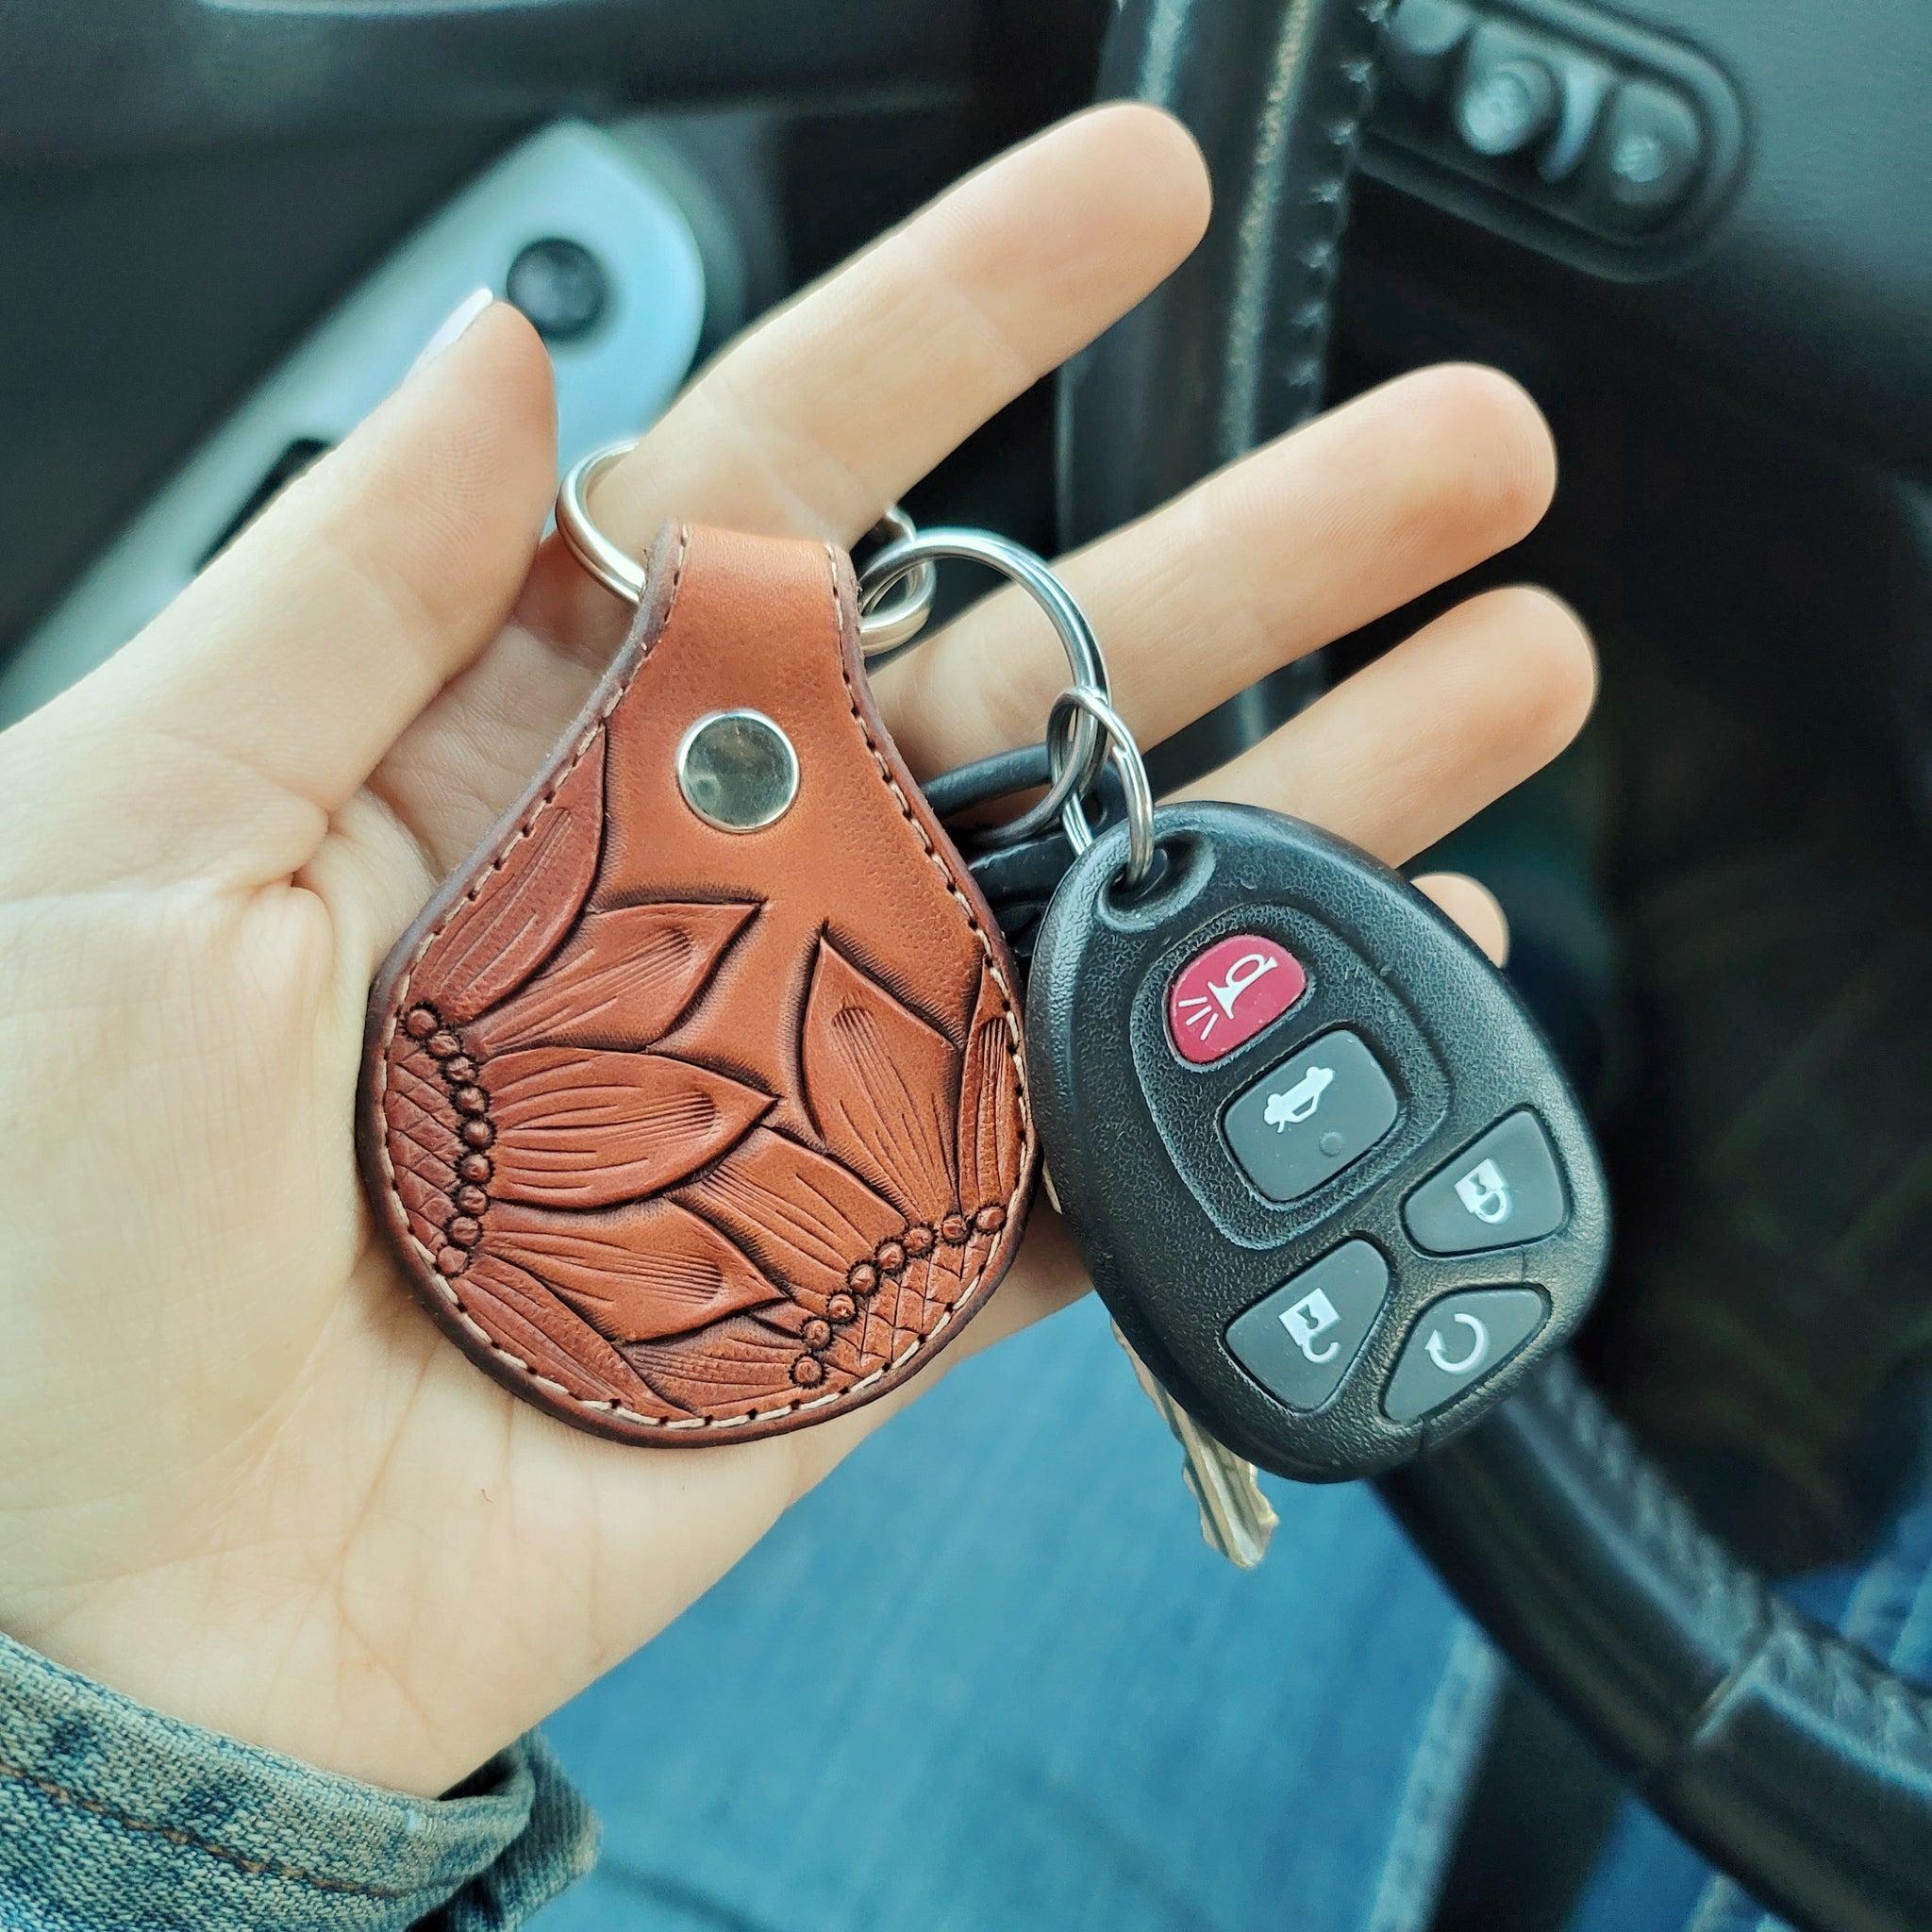 WIRESTER 2 Pcs PU Leather Round Silver Glitter Keychain for Keys, Cars,  Backpacks, Luggage - Animal, Van Gogh, Galaxy, Flower